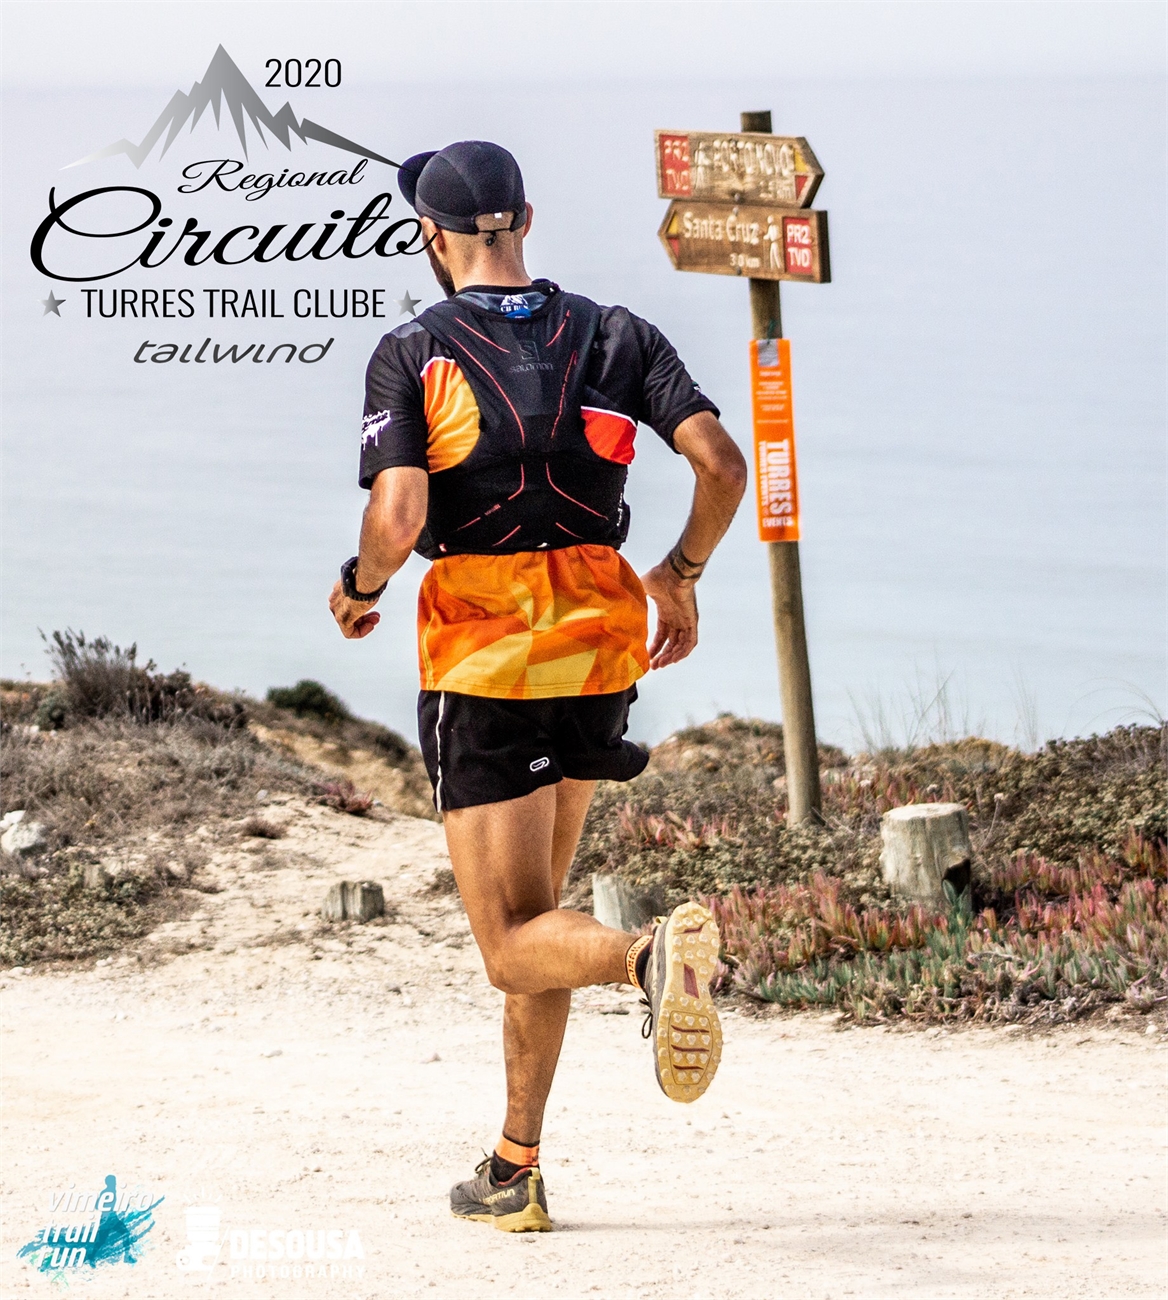 Circuito Regional Turres Trail Clube- Tailwind  2020 - Circuitos - TurresEvents